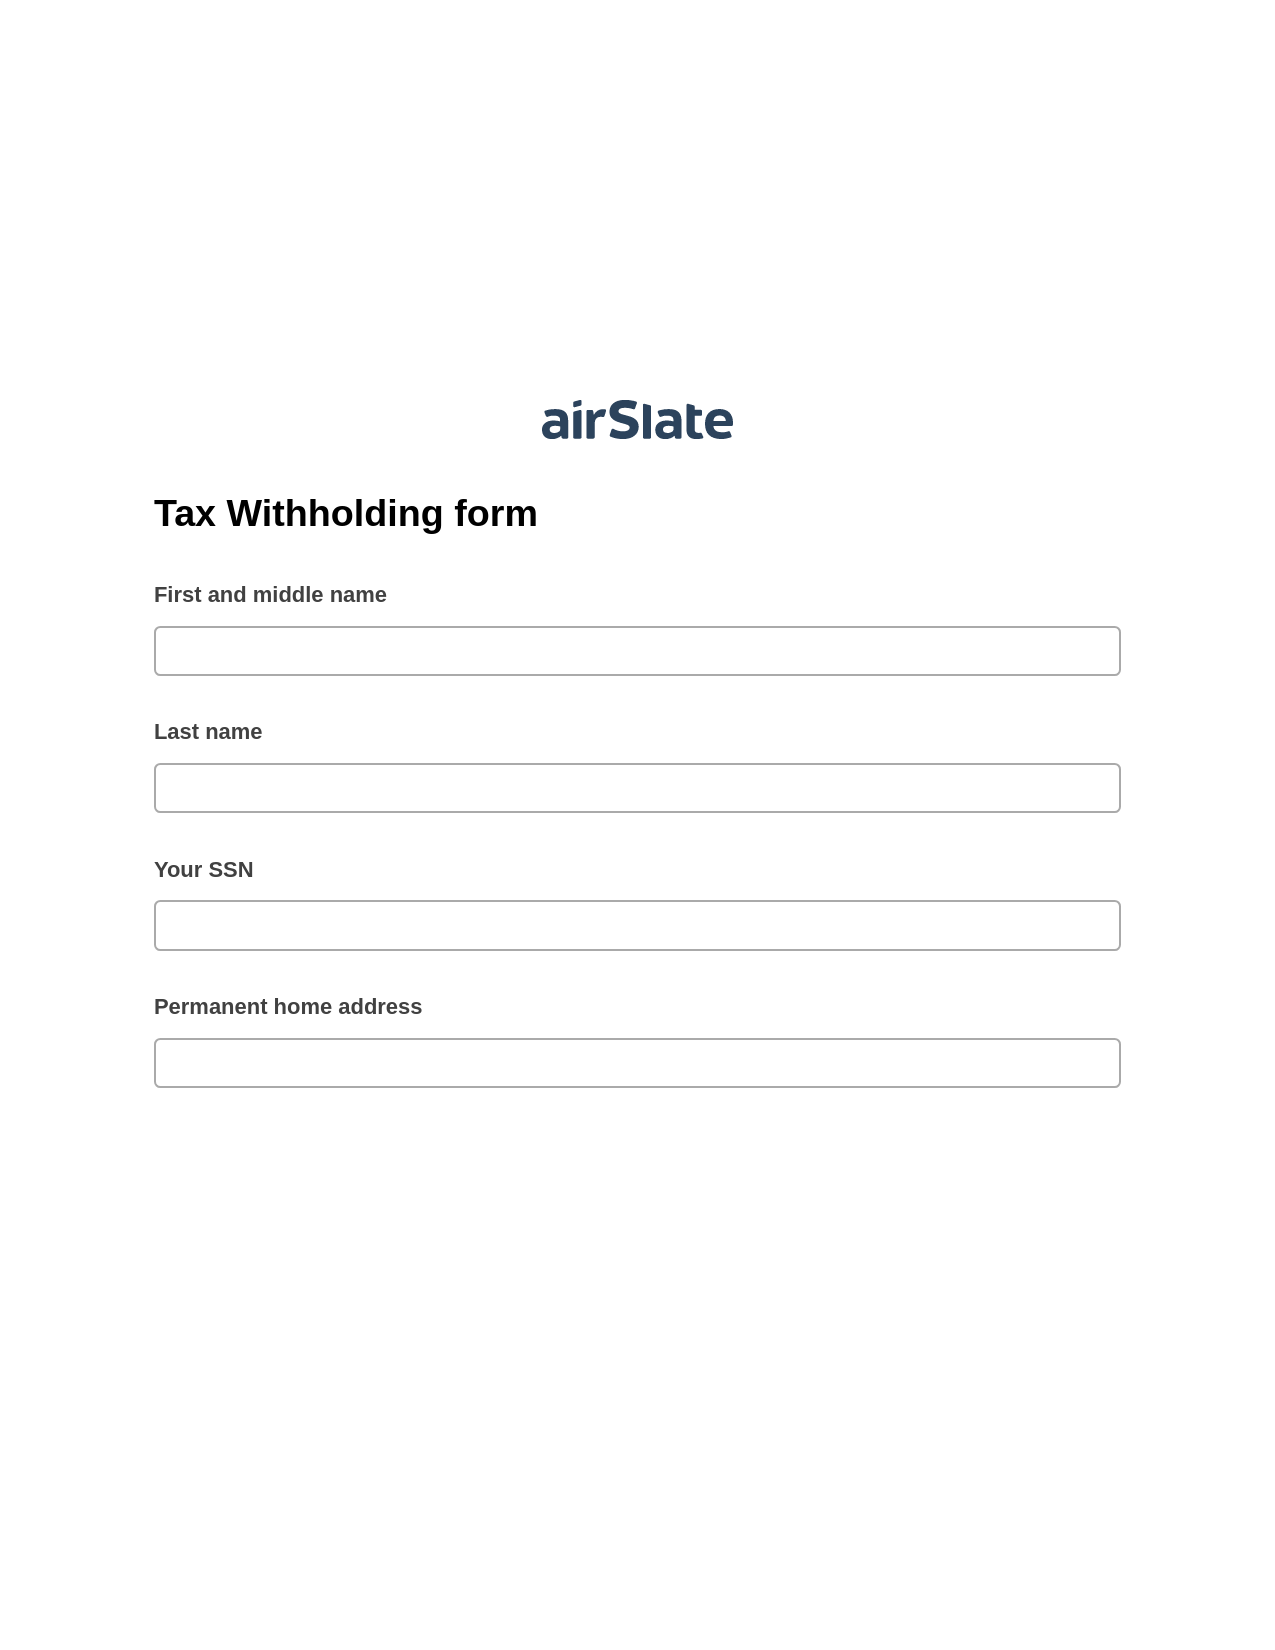 Multirole Tax Withholding form Pre-fill from Salesforce Records via SOQL Bot, Export to MS Dynamics 365 Bot, Export to Formstack Documents Bot